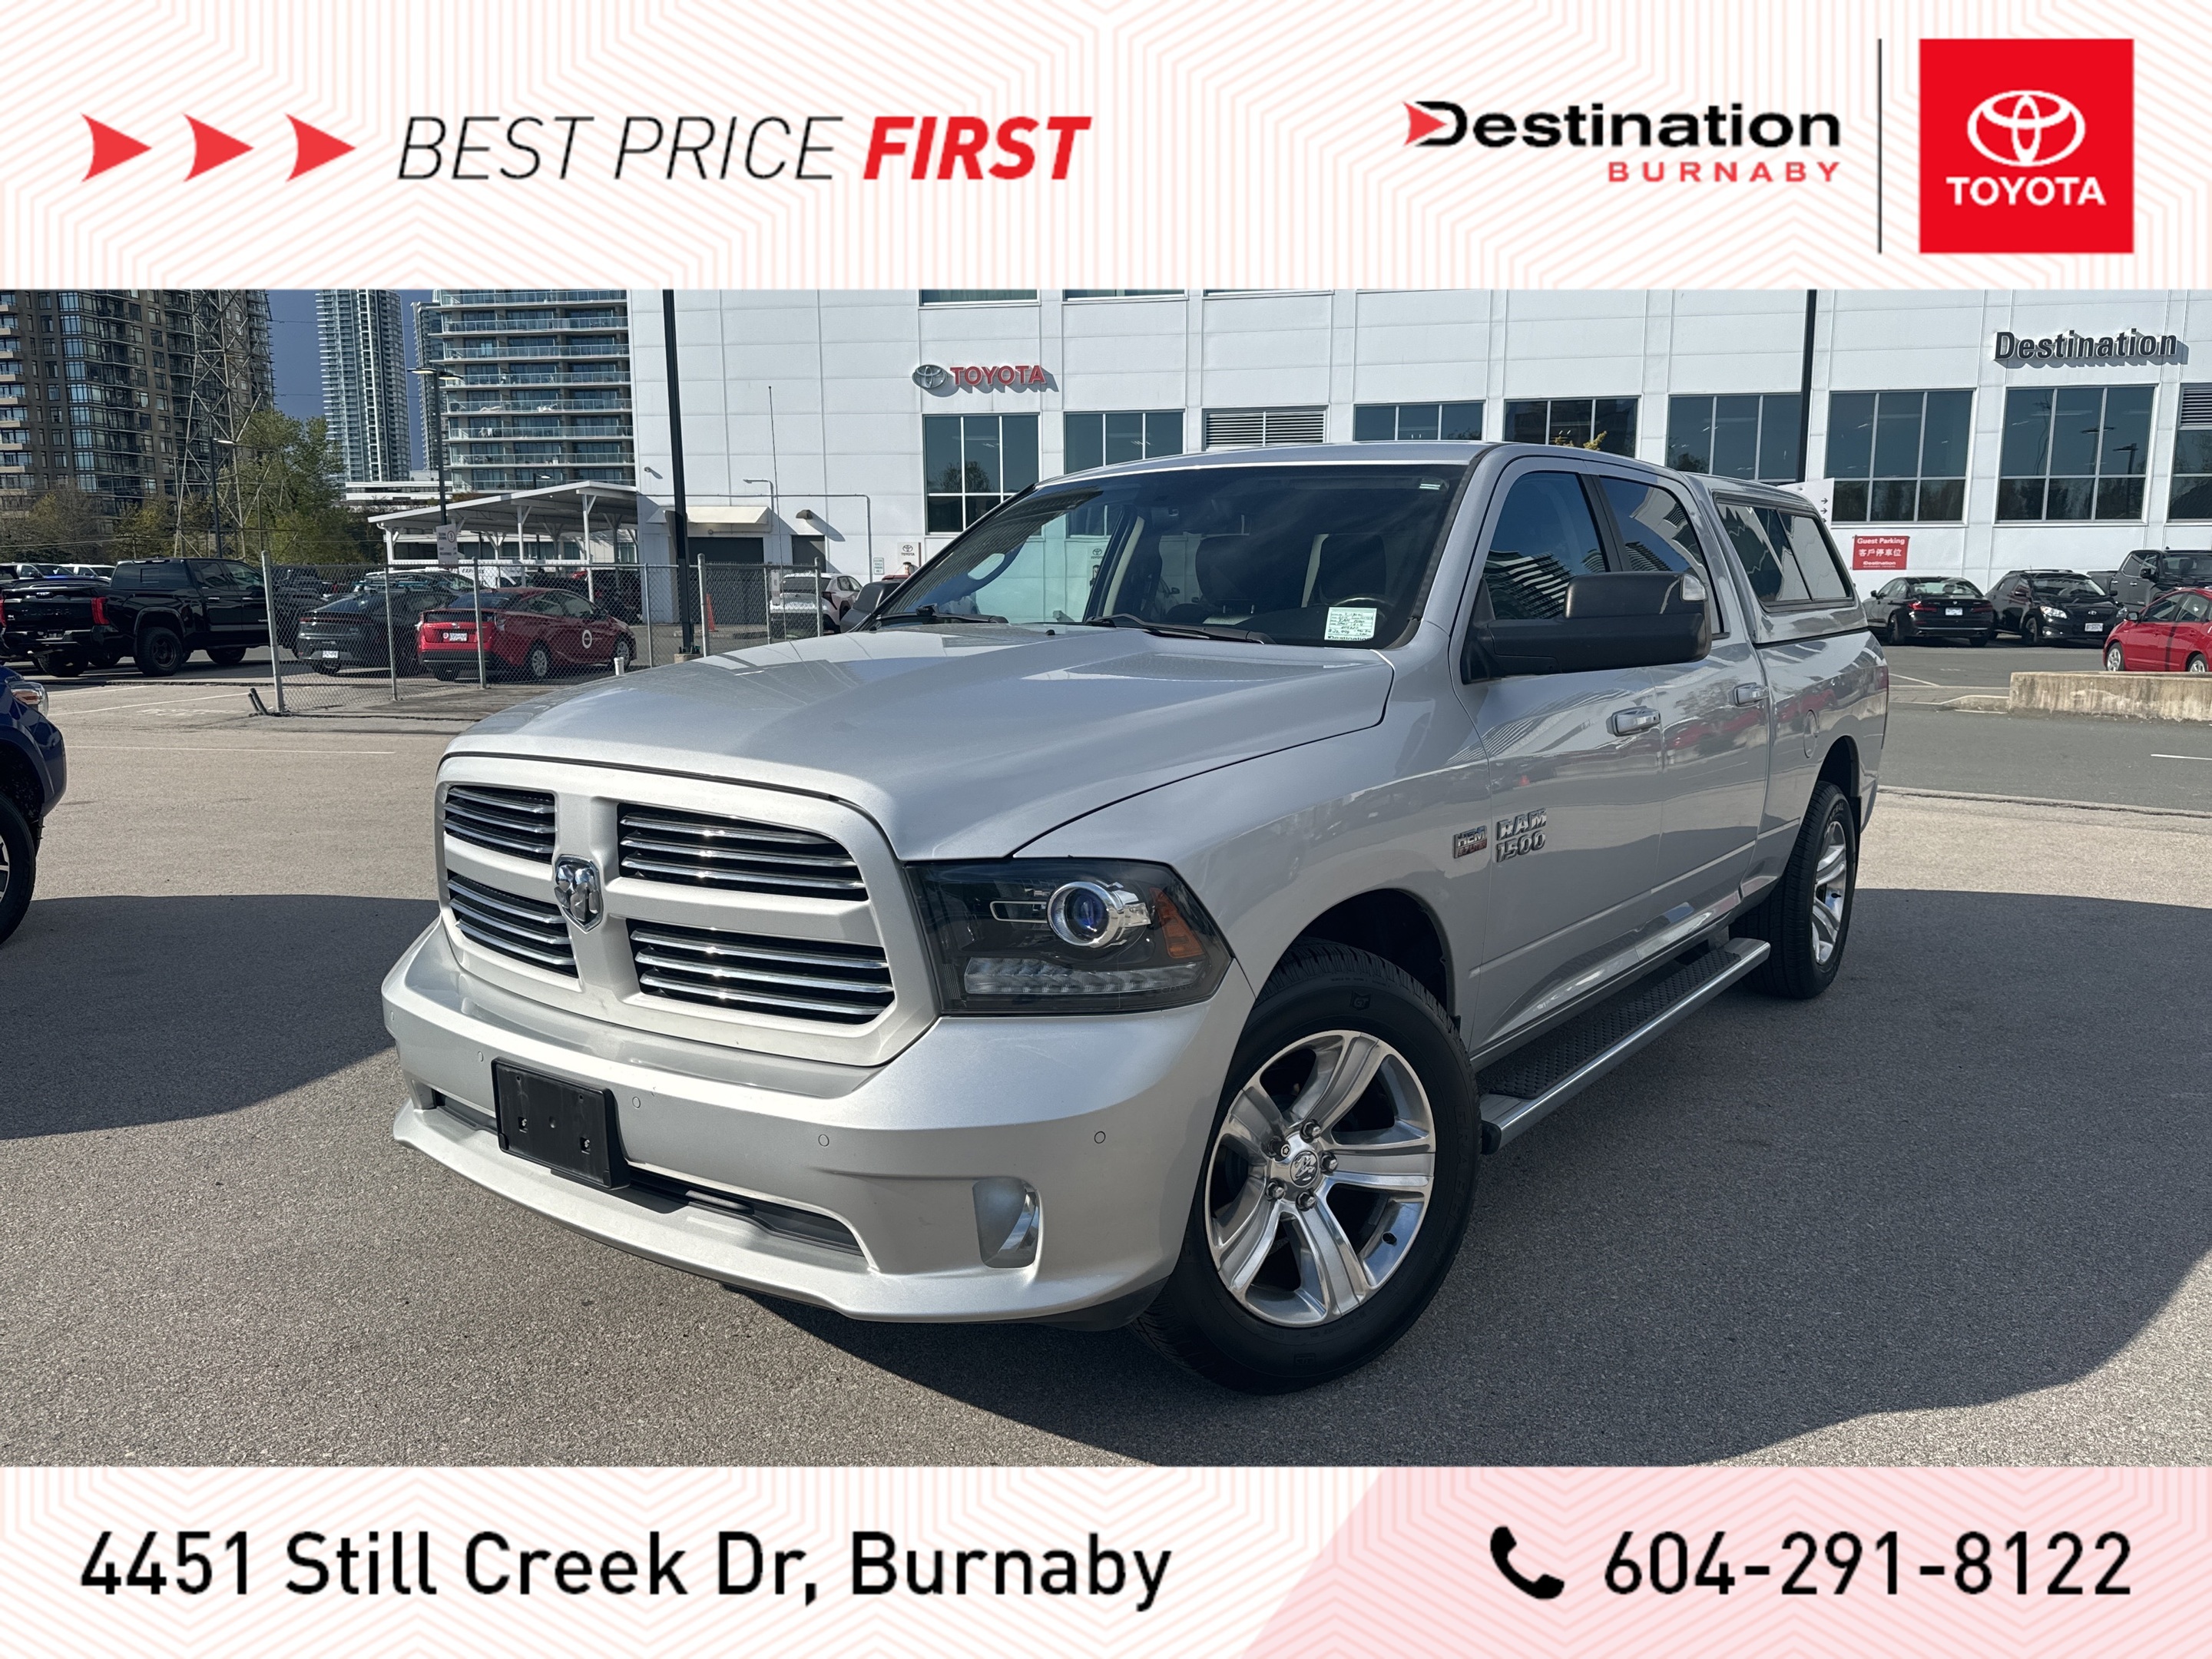 2015 Ram 1500 Sport - Local No Accidents! Great Condition Truck!